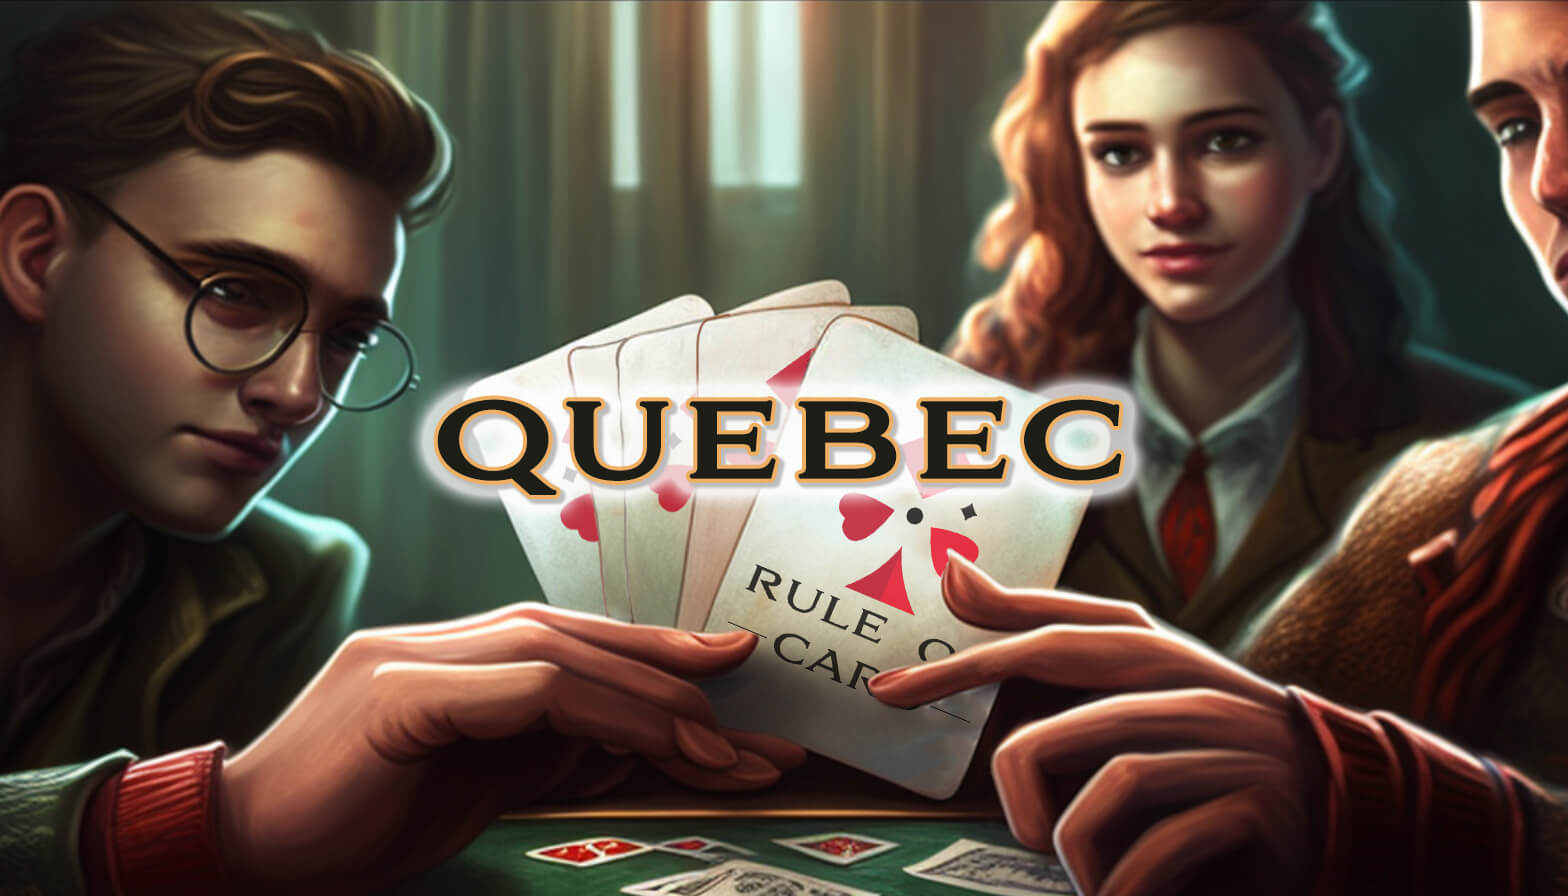 Playing the card game Quebec